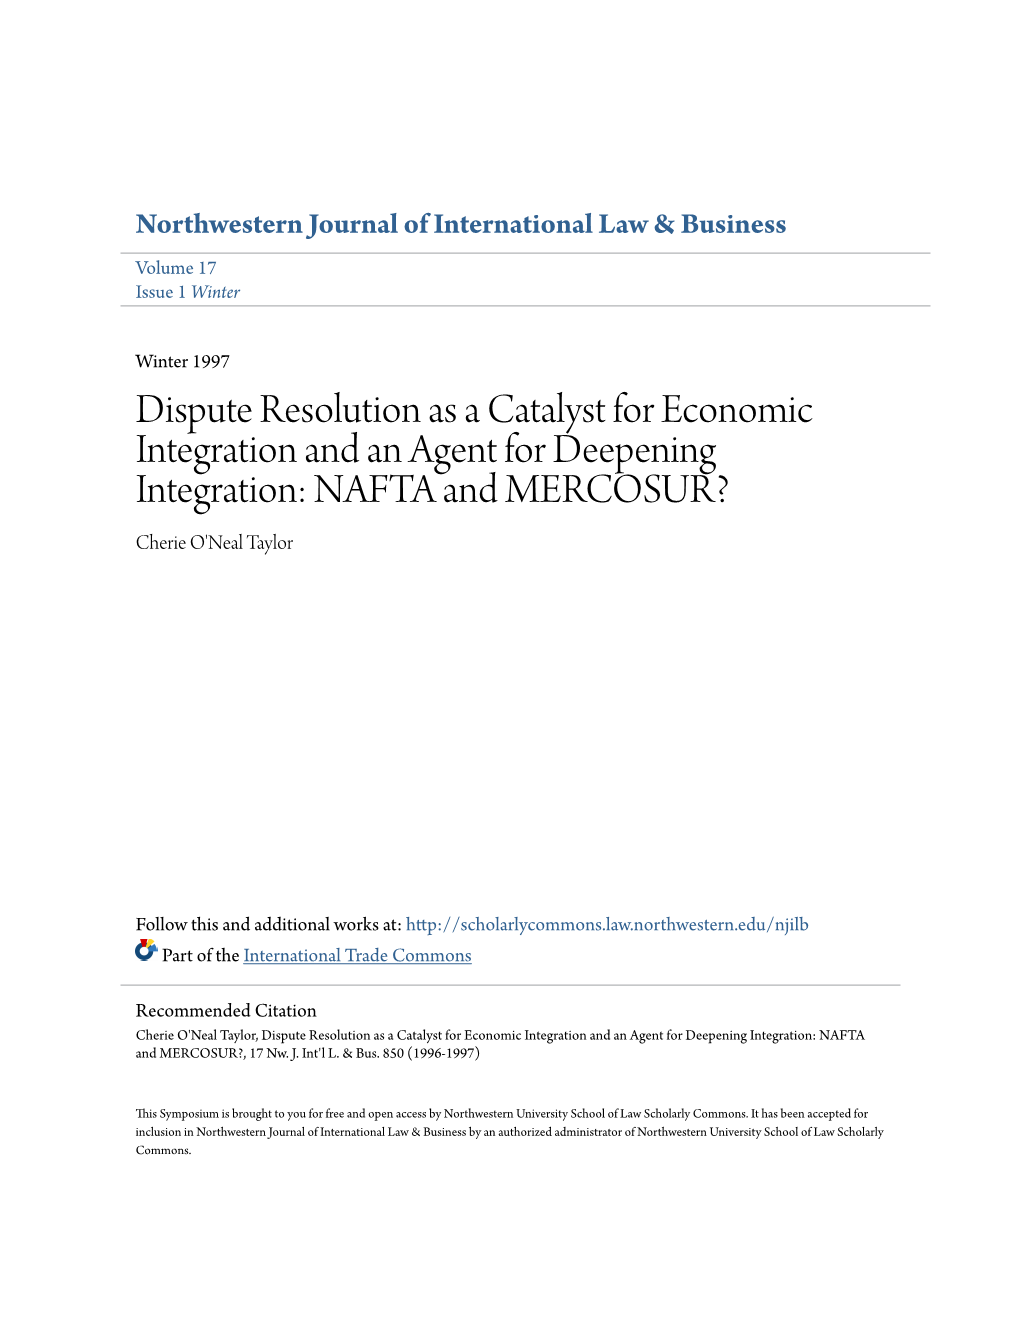 Dispute Resolution As a Catalyst for Economic Integration and an Agent for Deepening Integration: NAFTA and MERCOSUR? Cherie O'neal Taylor